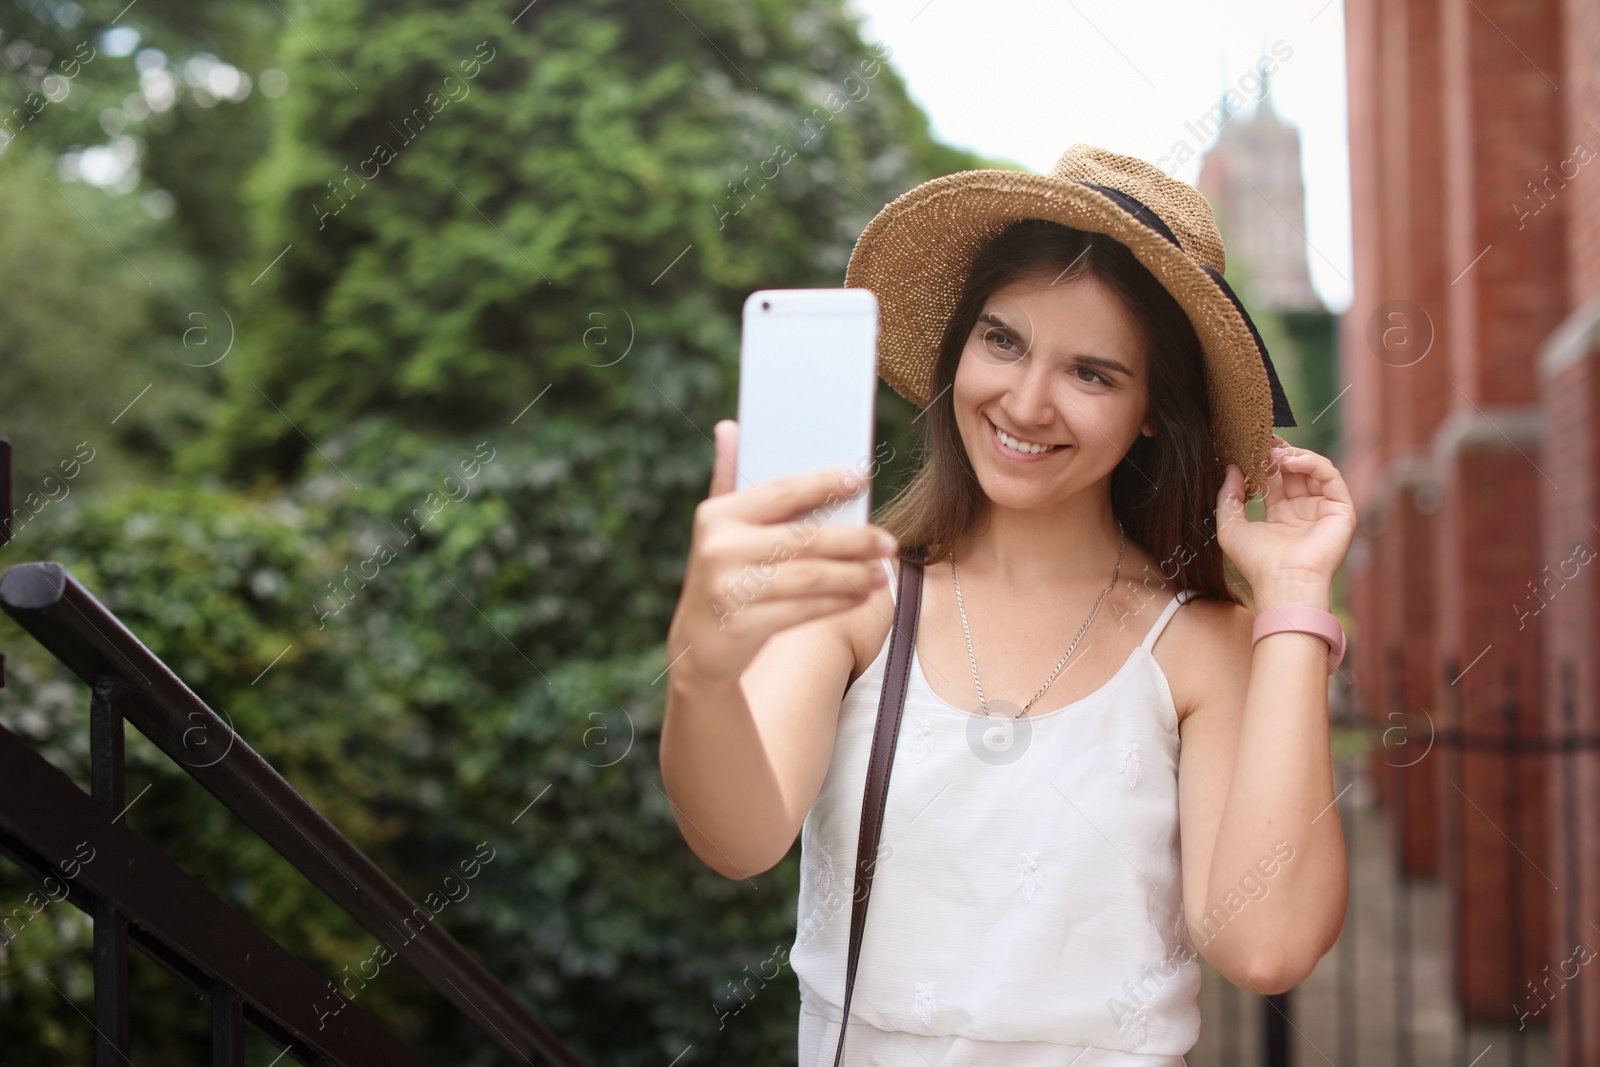 Photo of Young woman taking selfie on city street